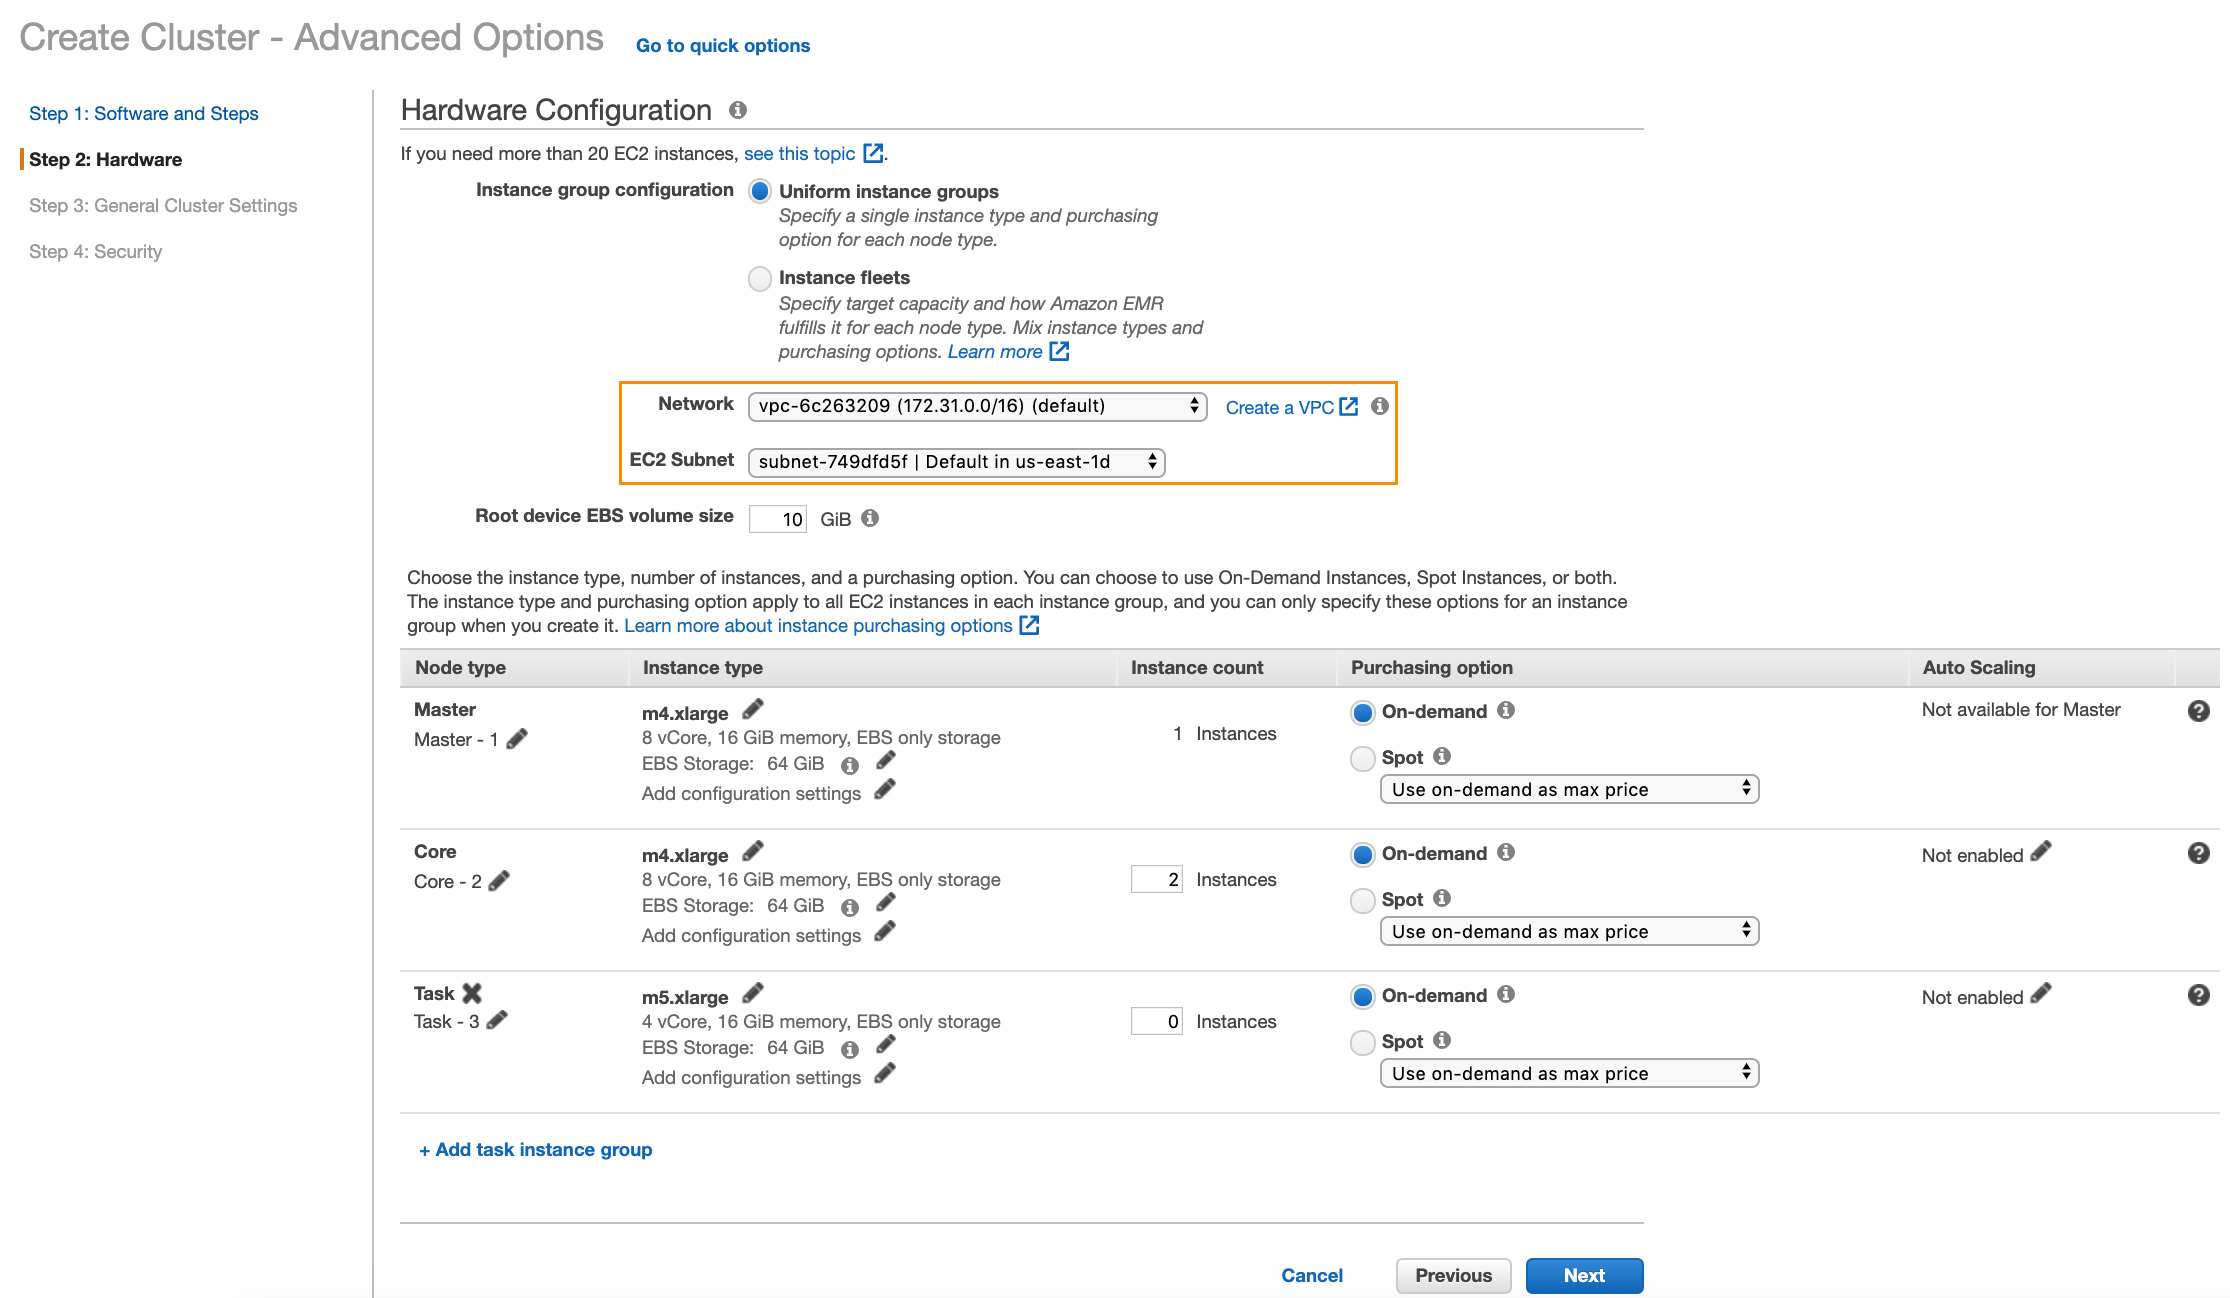 aws-marketplace-step2a-create-cluster-select-hw.png